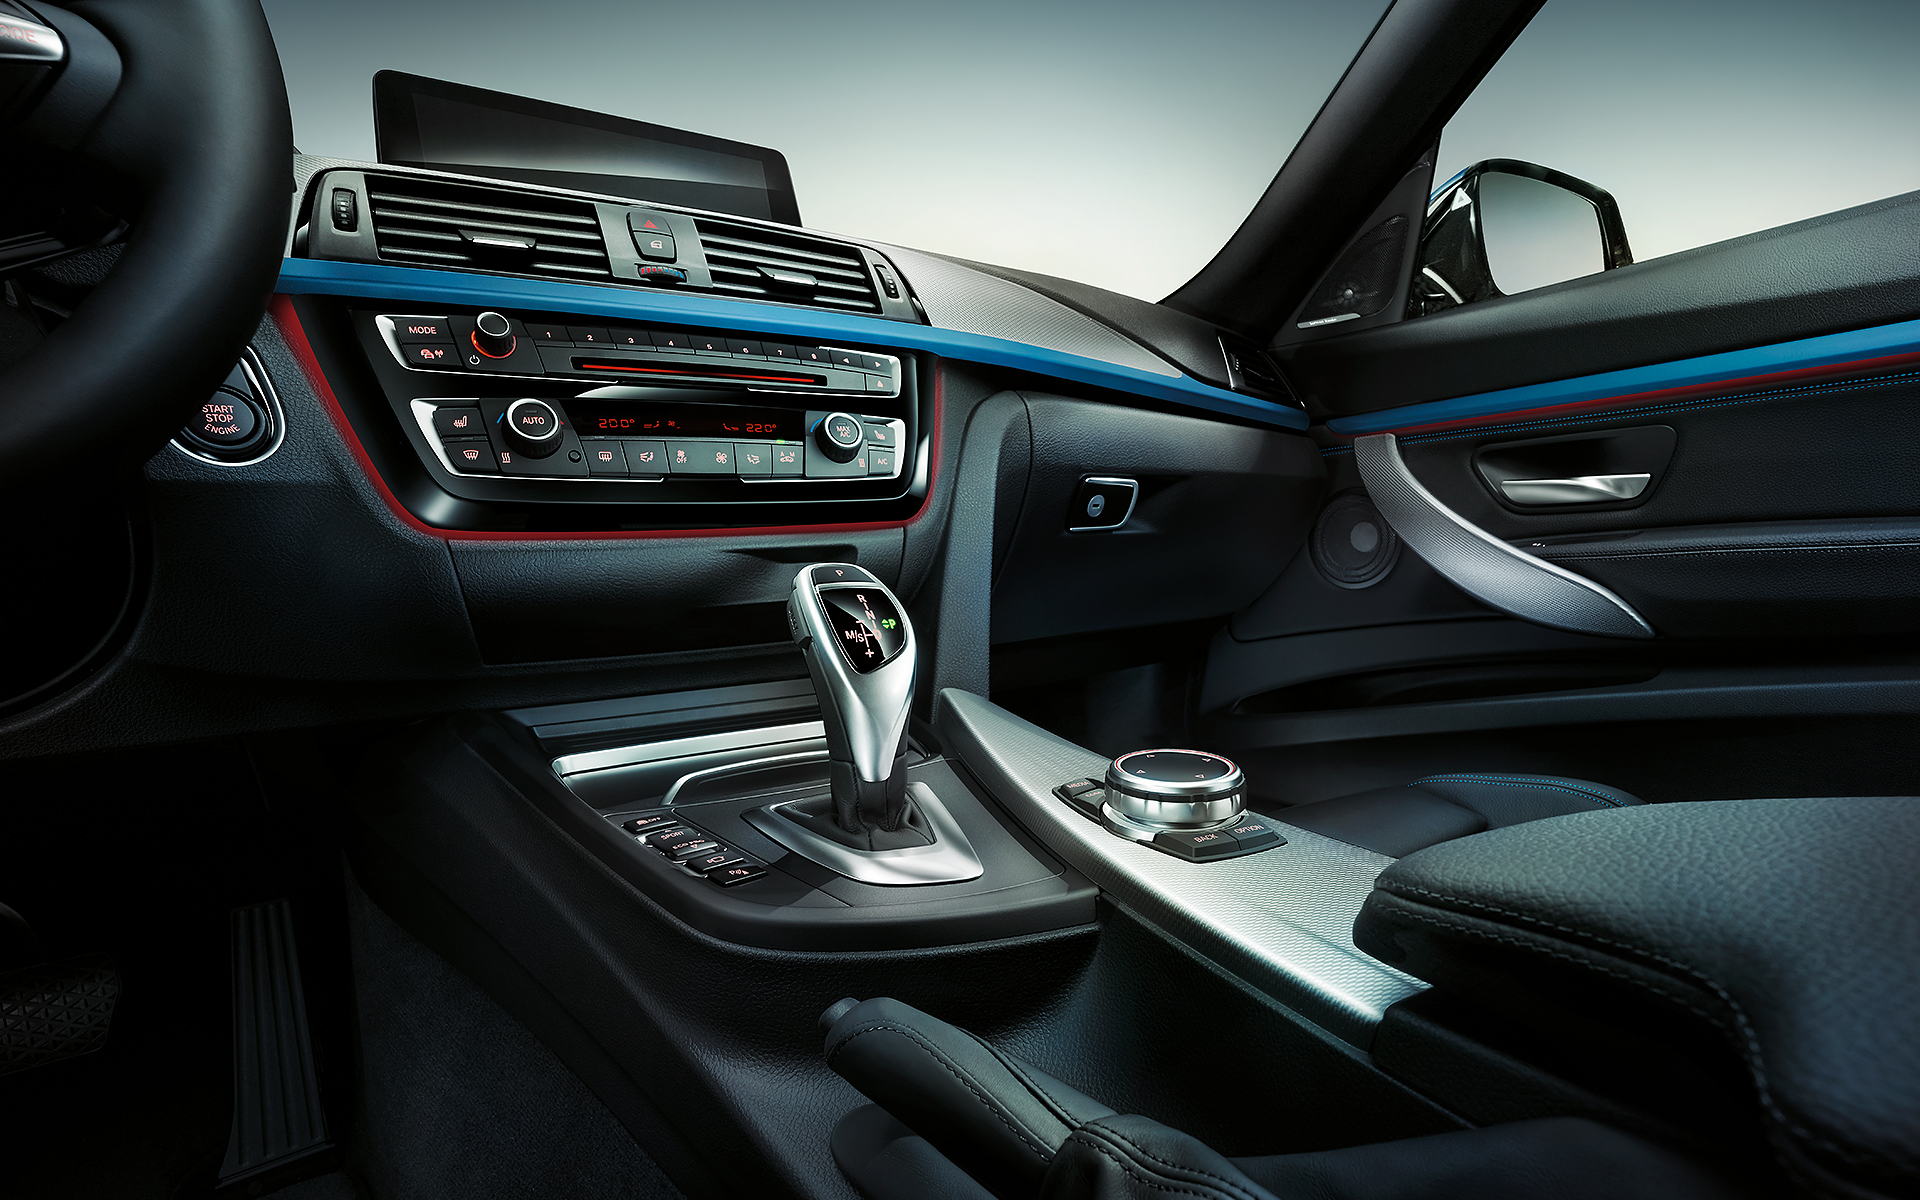 BMW 3 Series Gran Turismo Wallpaper and Background Image